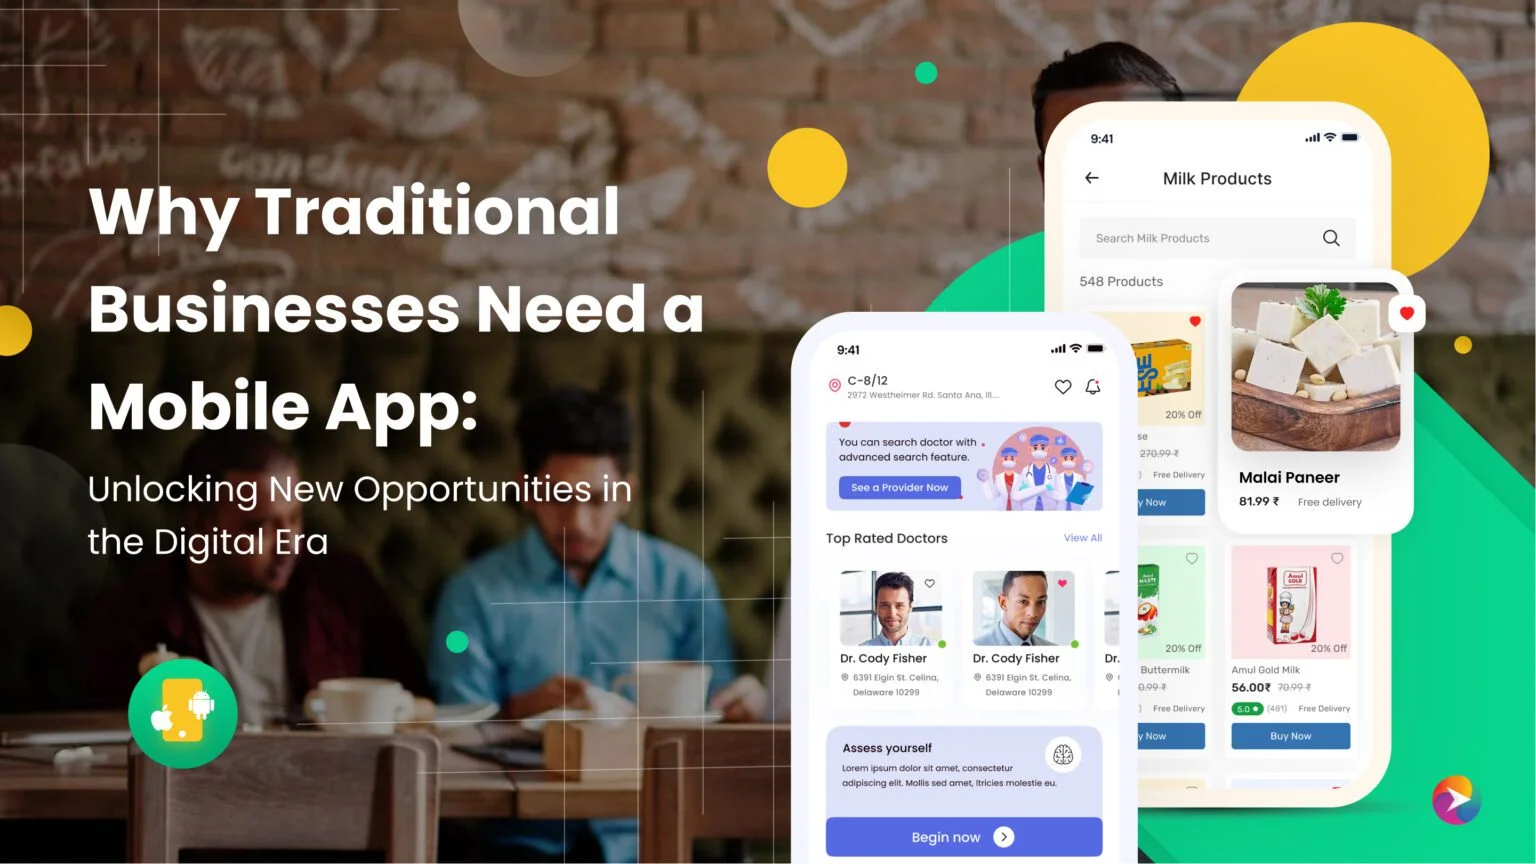 Why-Traditional-Businesses-Need-a-Mobile-App_1-1536x864